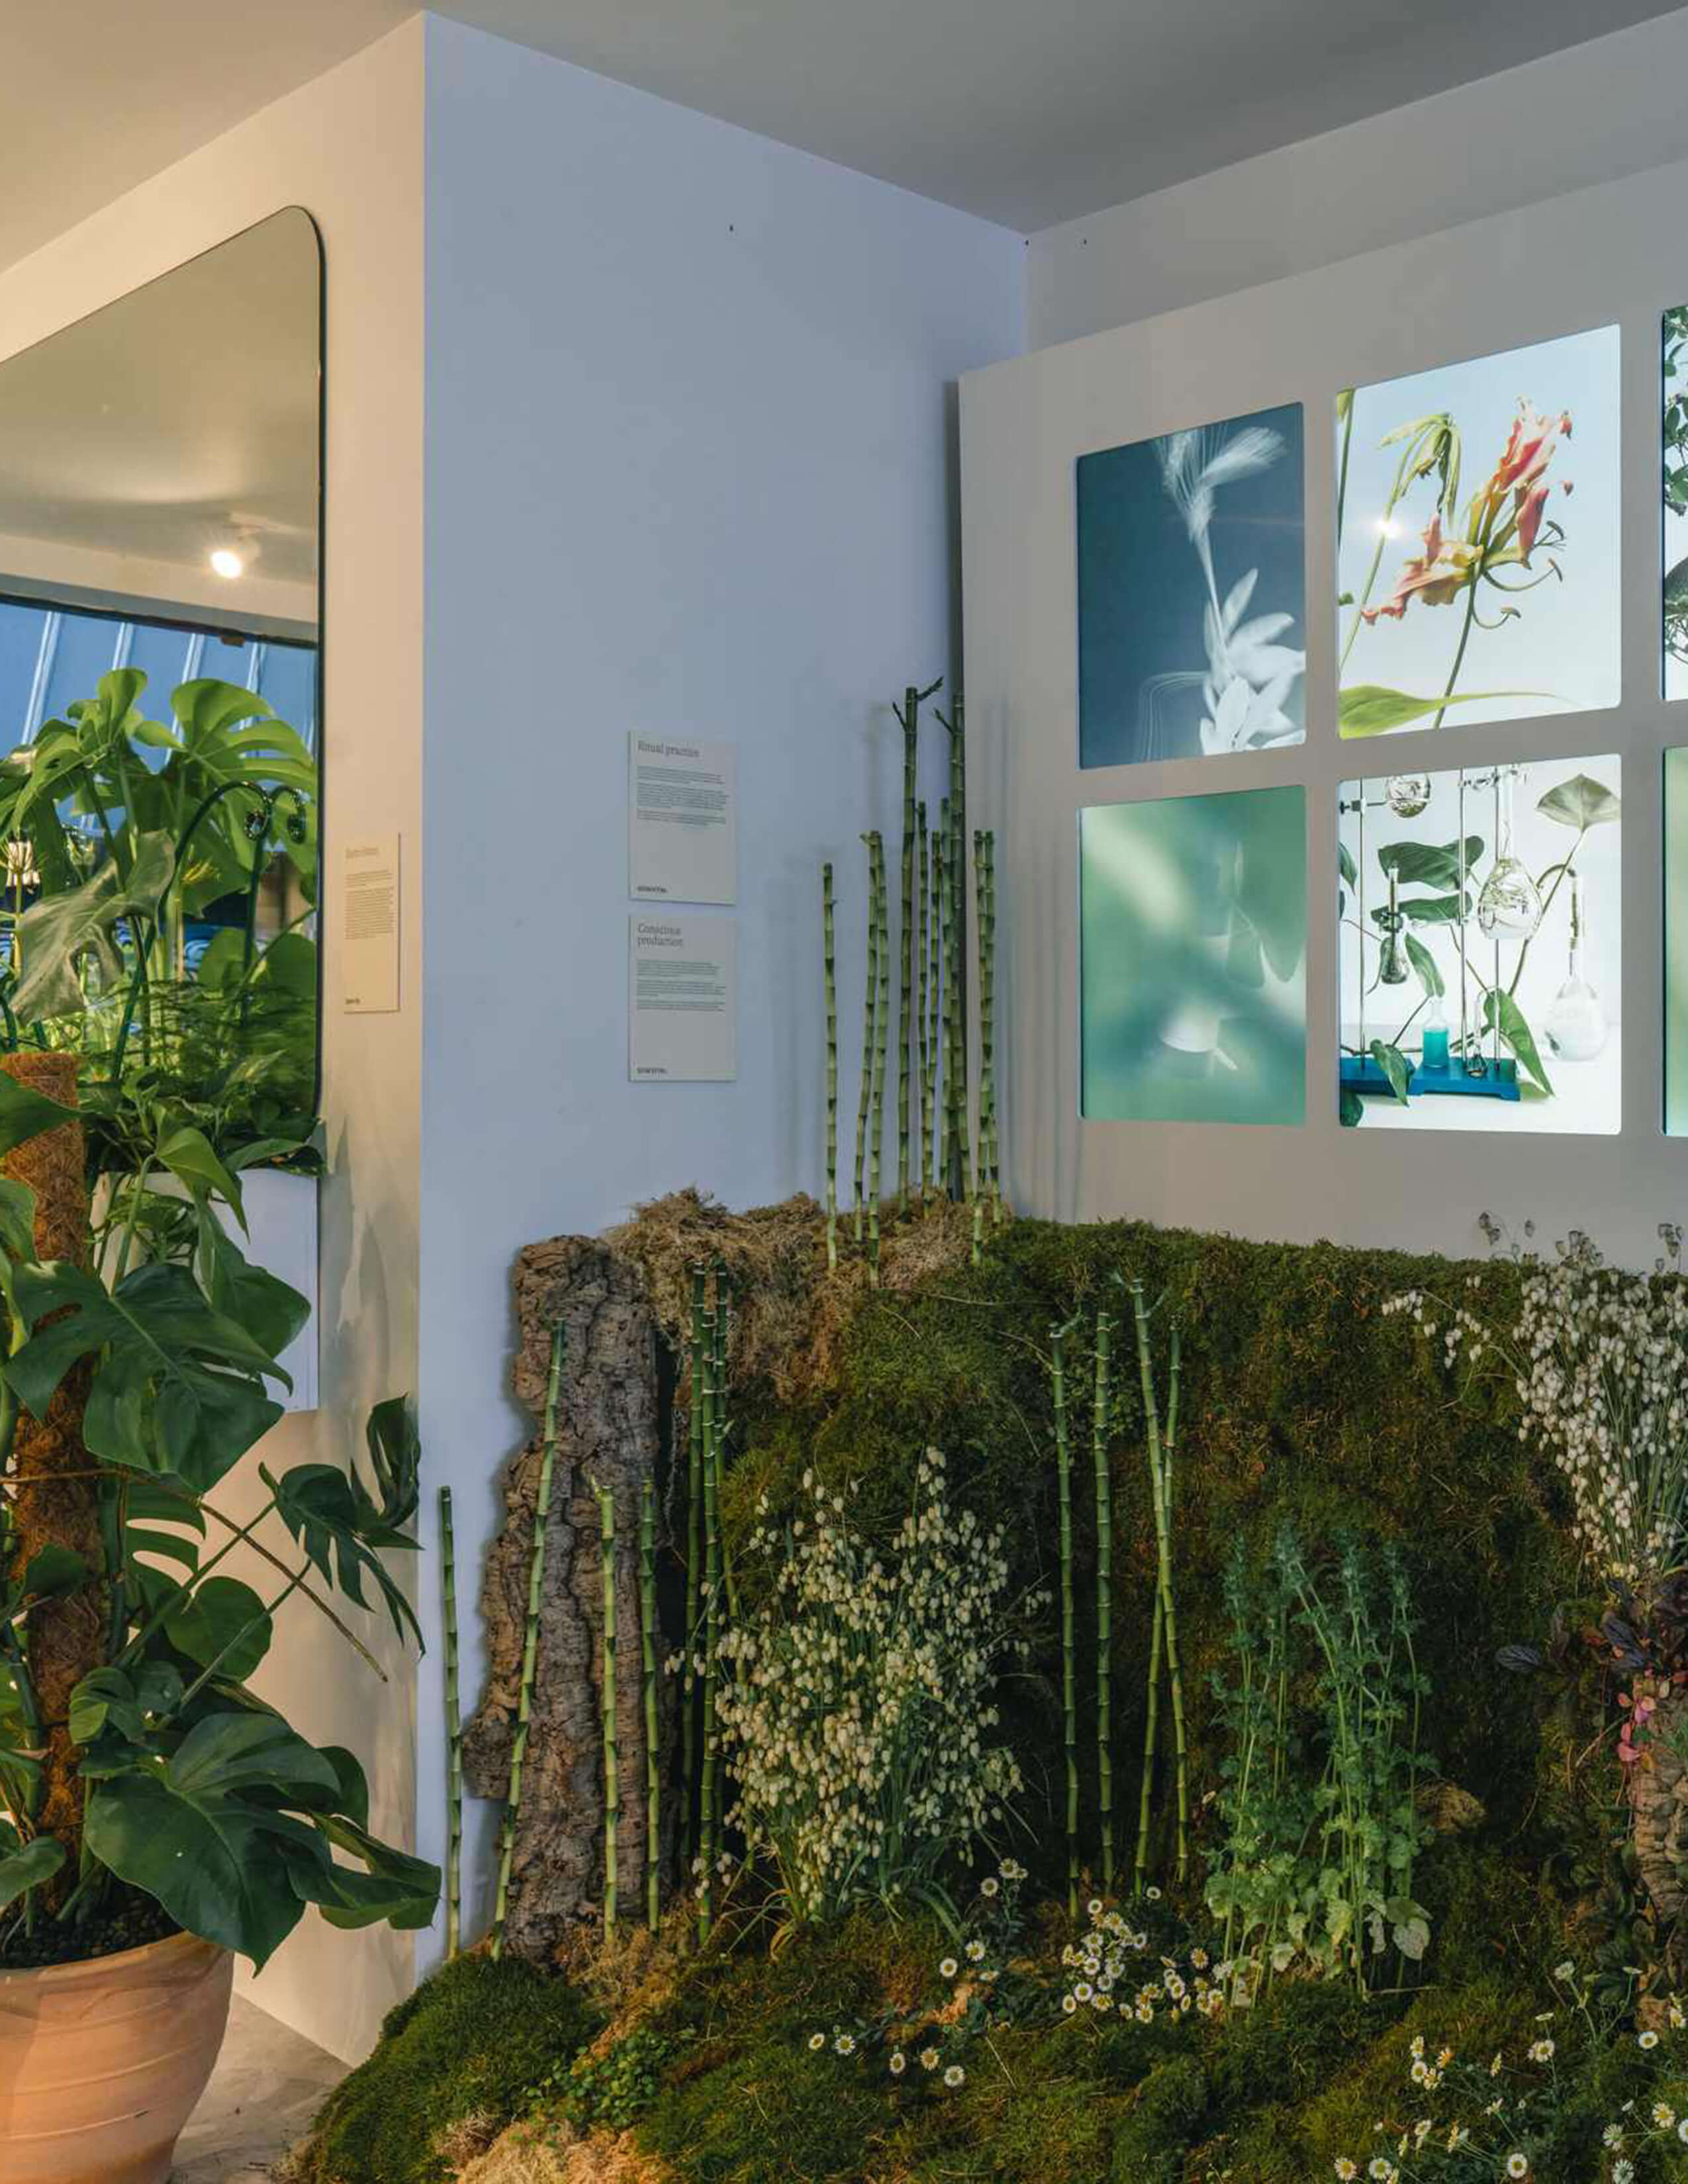 Load of green plants, including moss, bamboo sticks, daisies, and small white flowers leaning against the wall and behind it,  there are photographs of plants and flowers up on the wall.